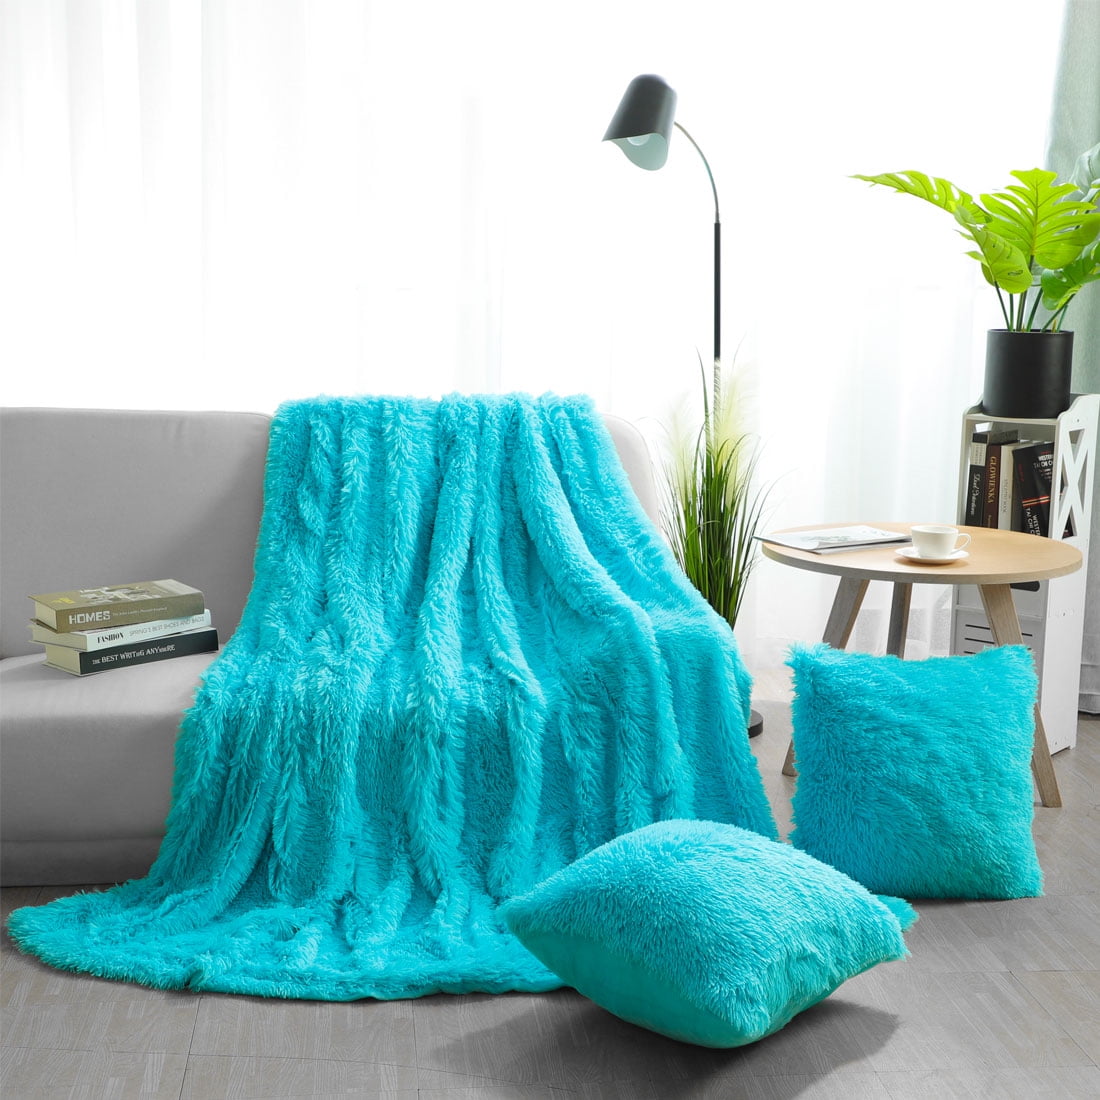 Buy Shaggy Long fur Throw Blanket, Super Soft Faux Fur Lightweight Warm  Cozy Plush Fluffy Decorative Blanket for Couch,Bed, Chair(51x63, Pink)  Online at Low Prices in India 